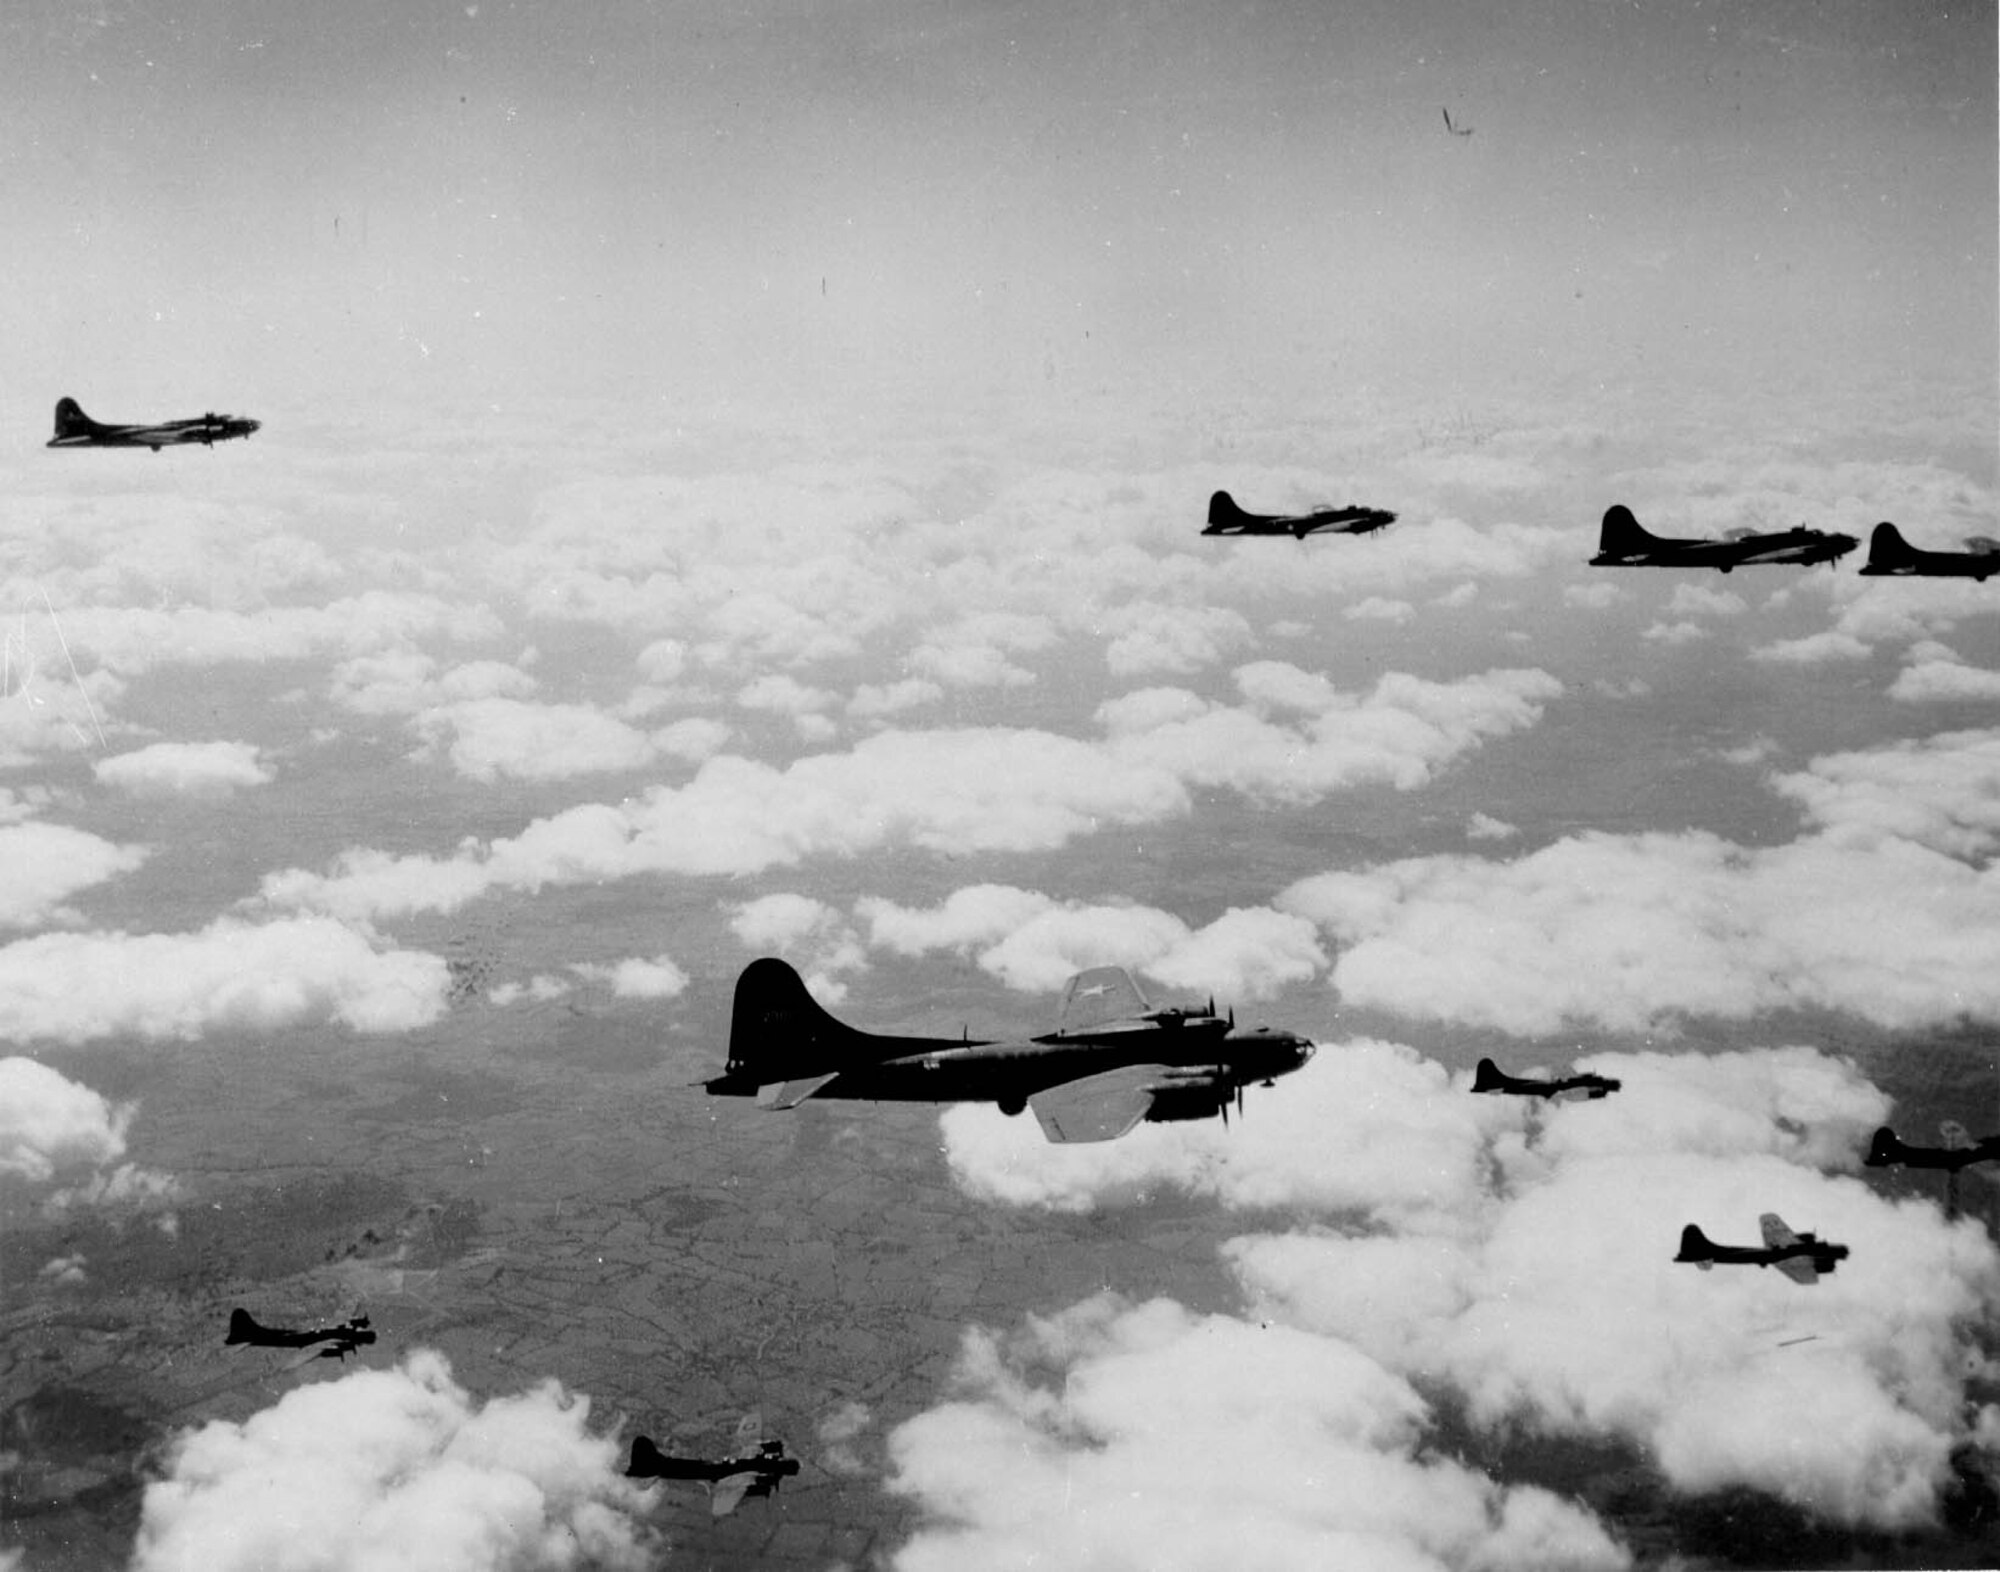 92nd Bombardment Group B-17s on their way to their target in Nazi-occupied Europe during WWII. The 92 BG operated from airfields in England during the war. (Courtesy photo)